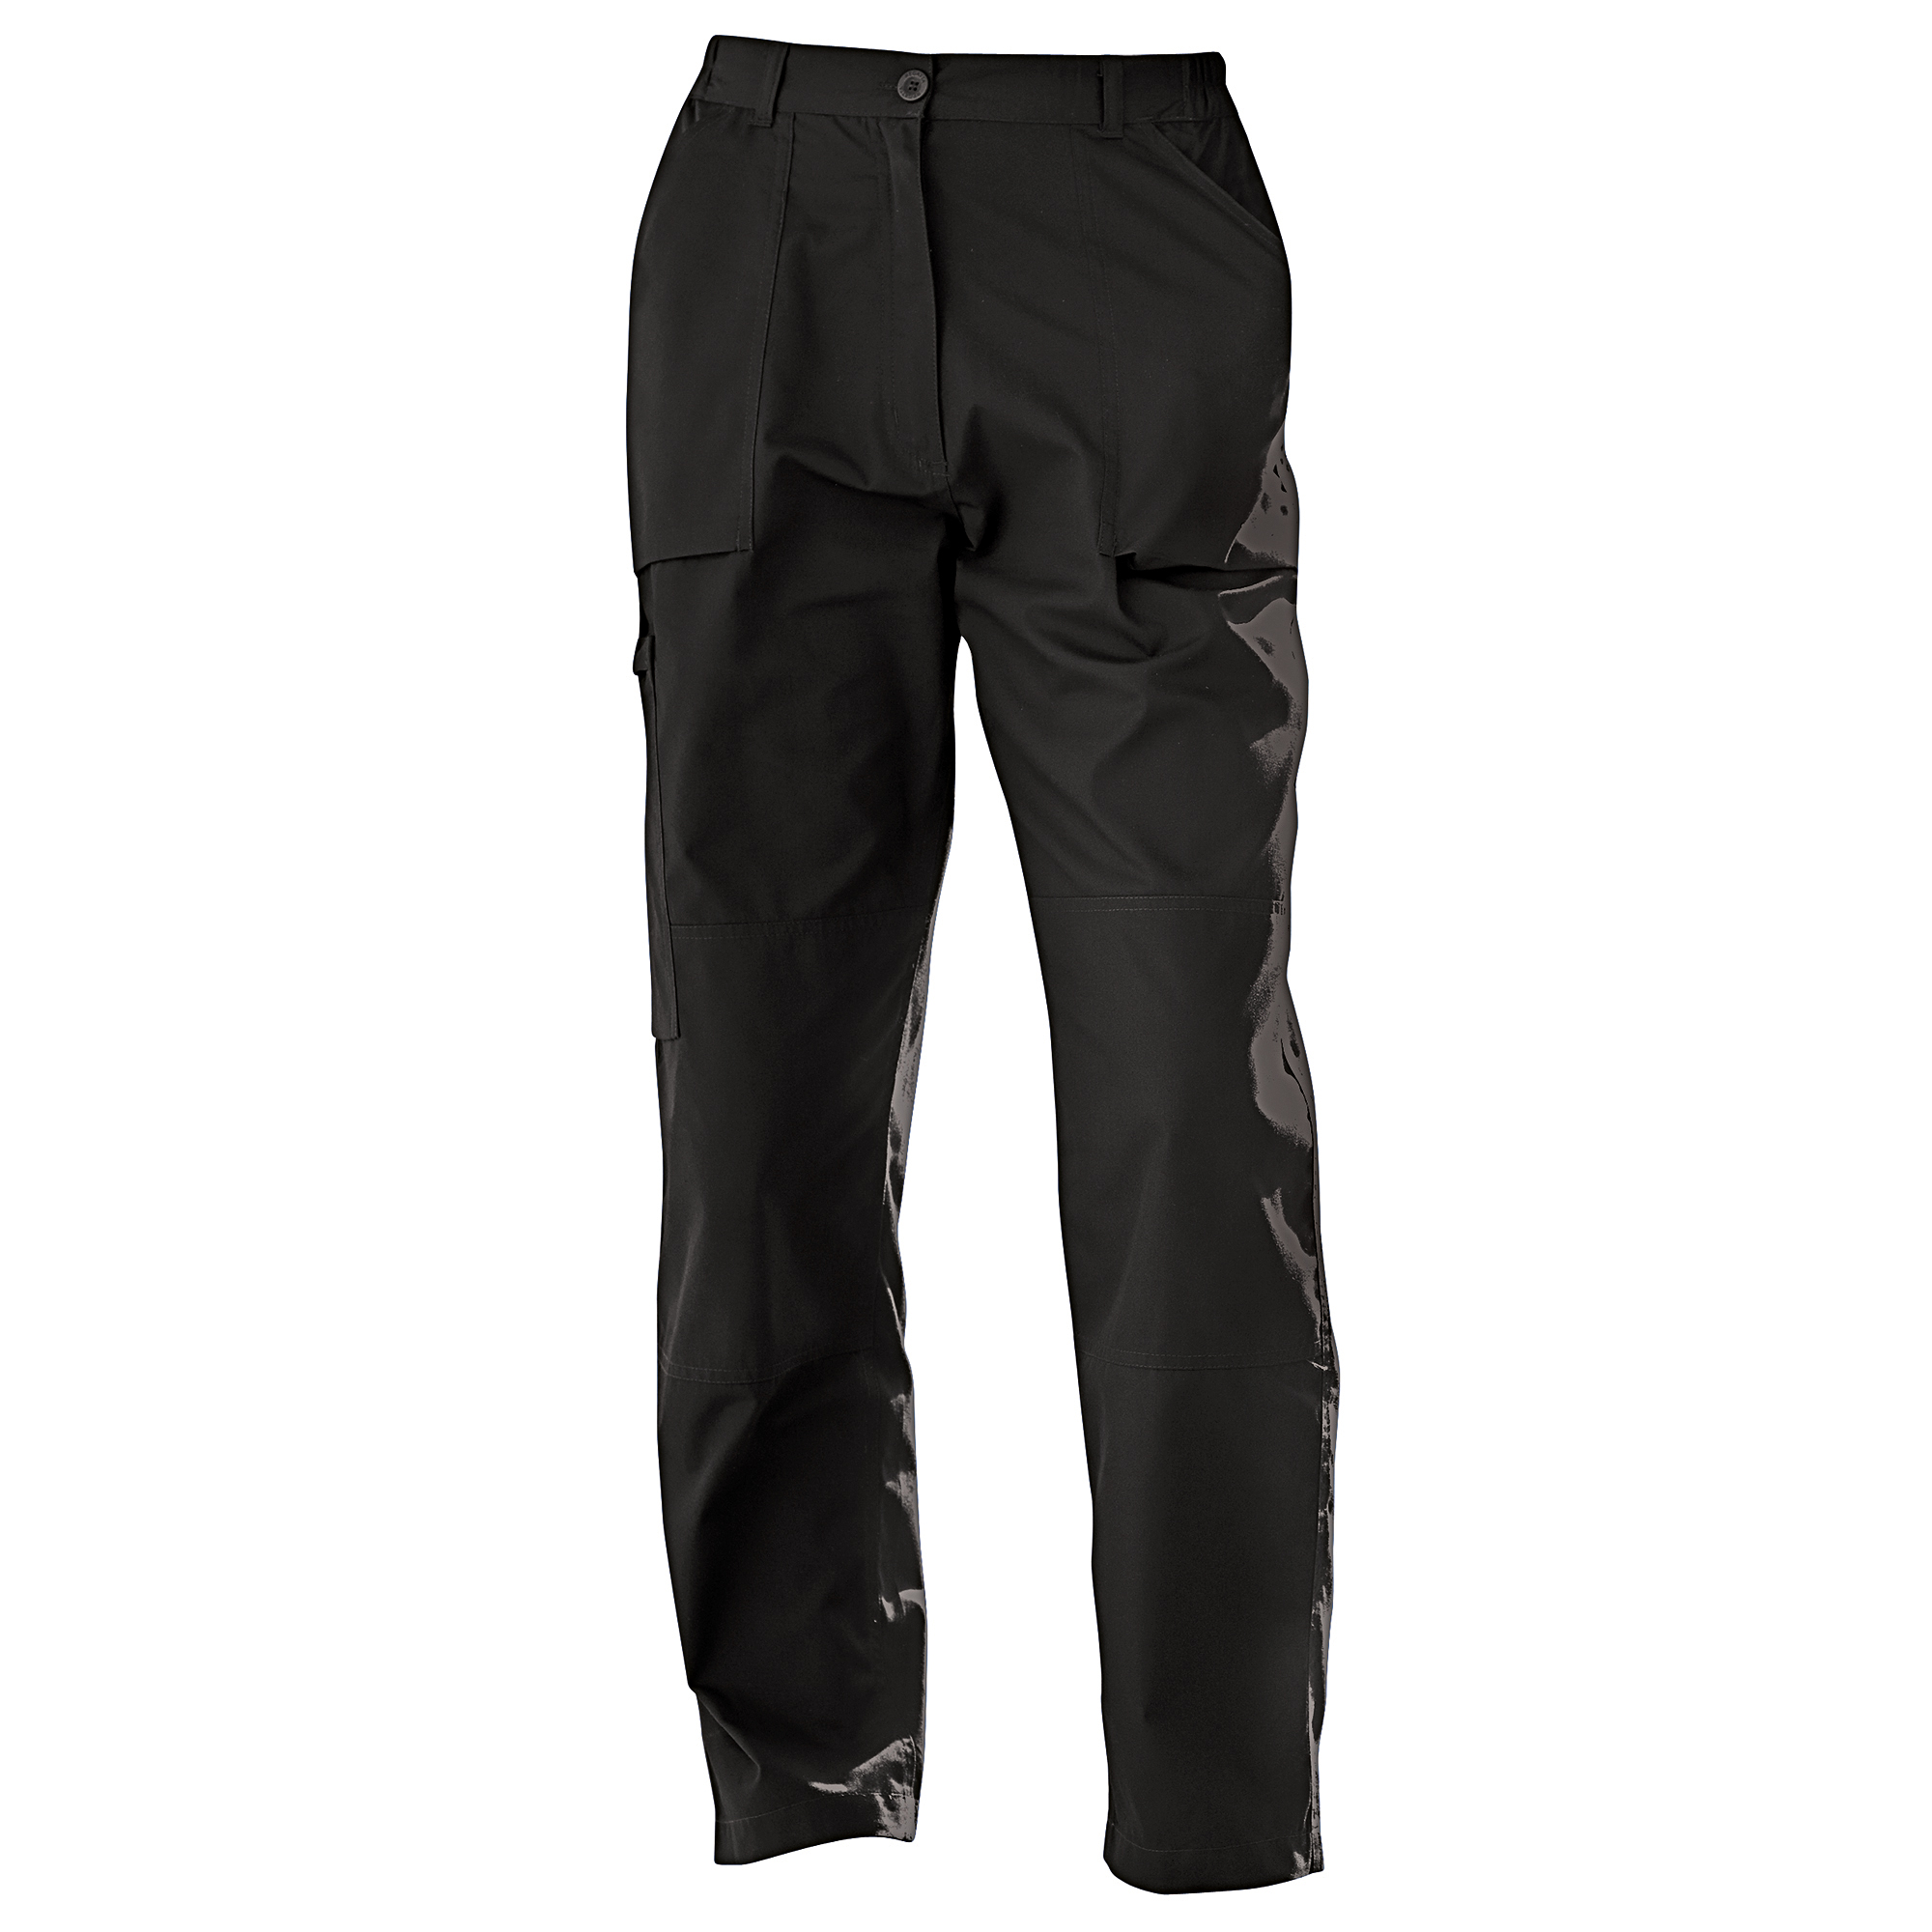 ax-httpswebsystems.s3.amazonaws.comtmp_for_downloadregatta-womens-action-trousers-black.jpg